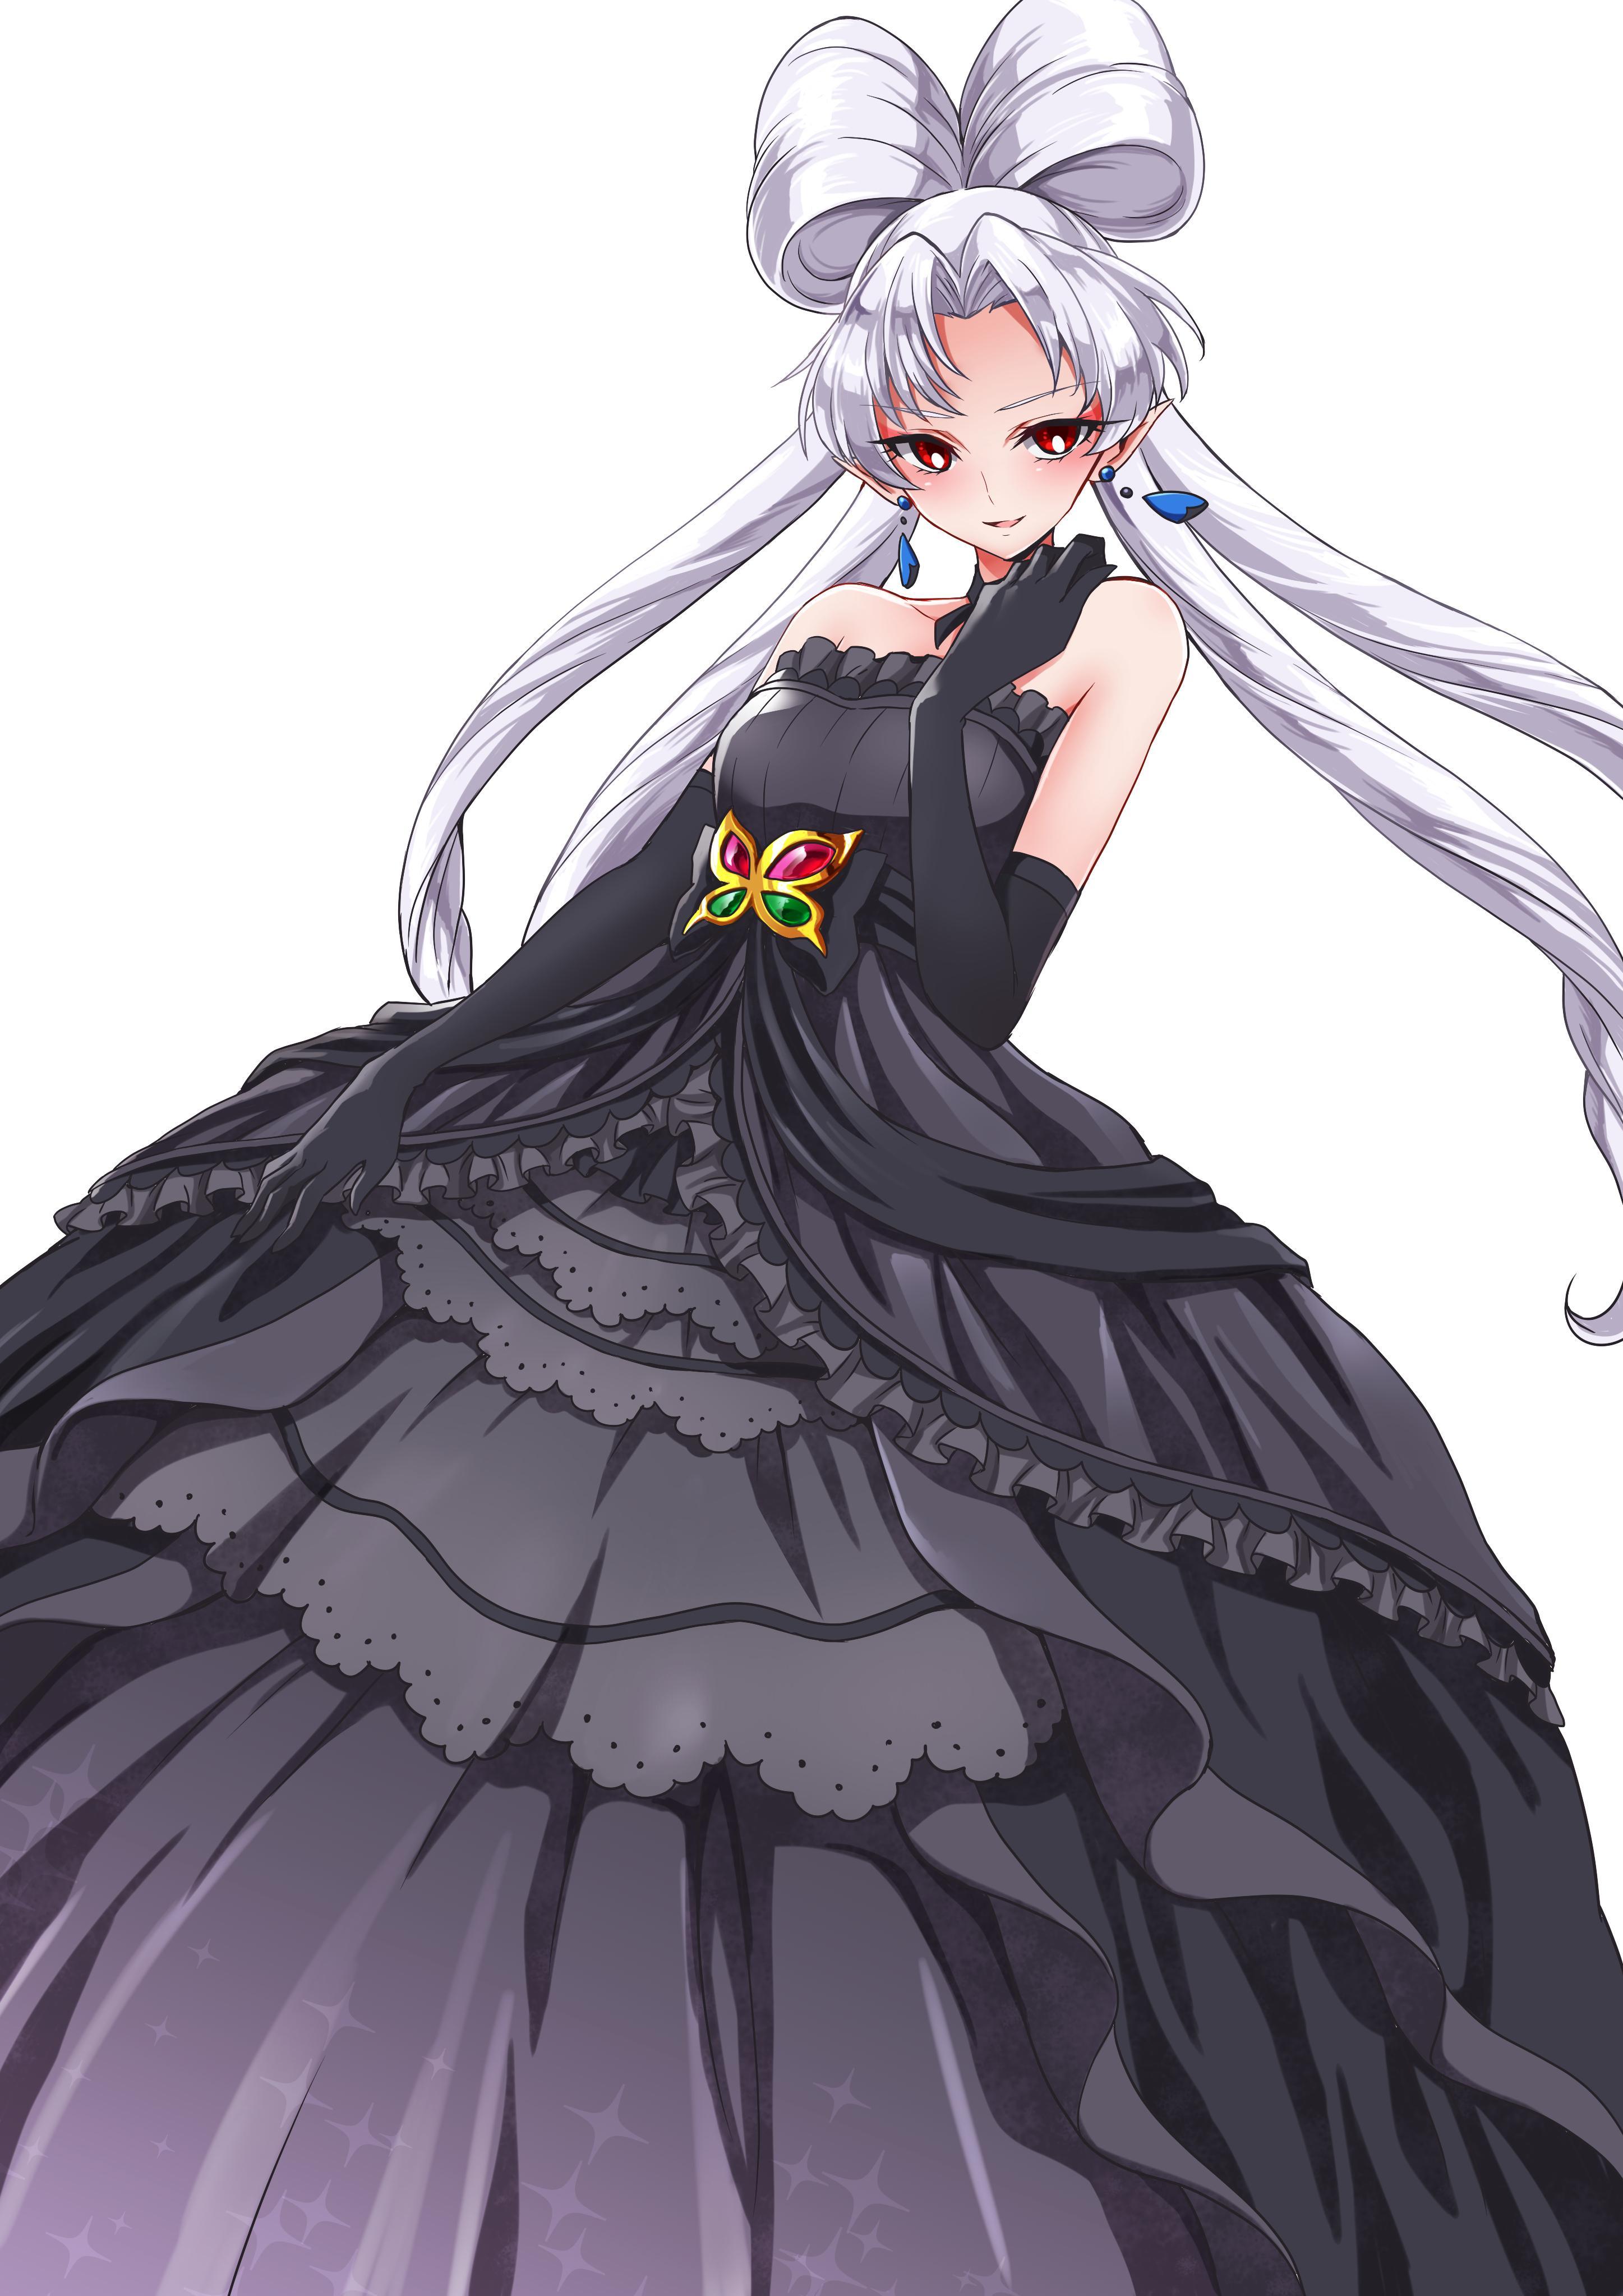 AI Image Generator: A beautiful amazing anime art of busy anime princess  wearing a exquisite dress with a low neckline, a short skirt, and white  lace trim, wearing a gold tiara, wearing